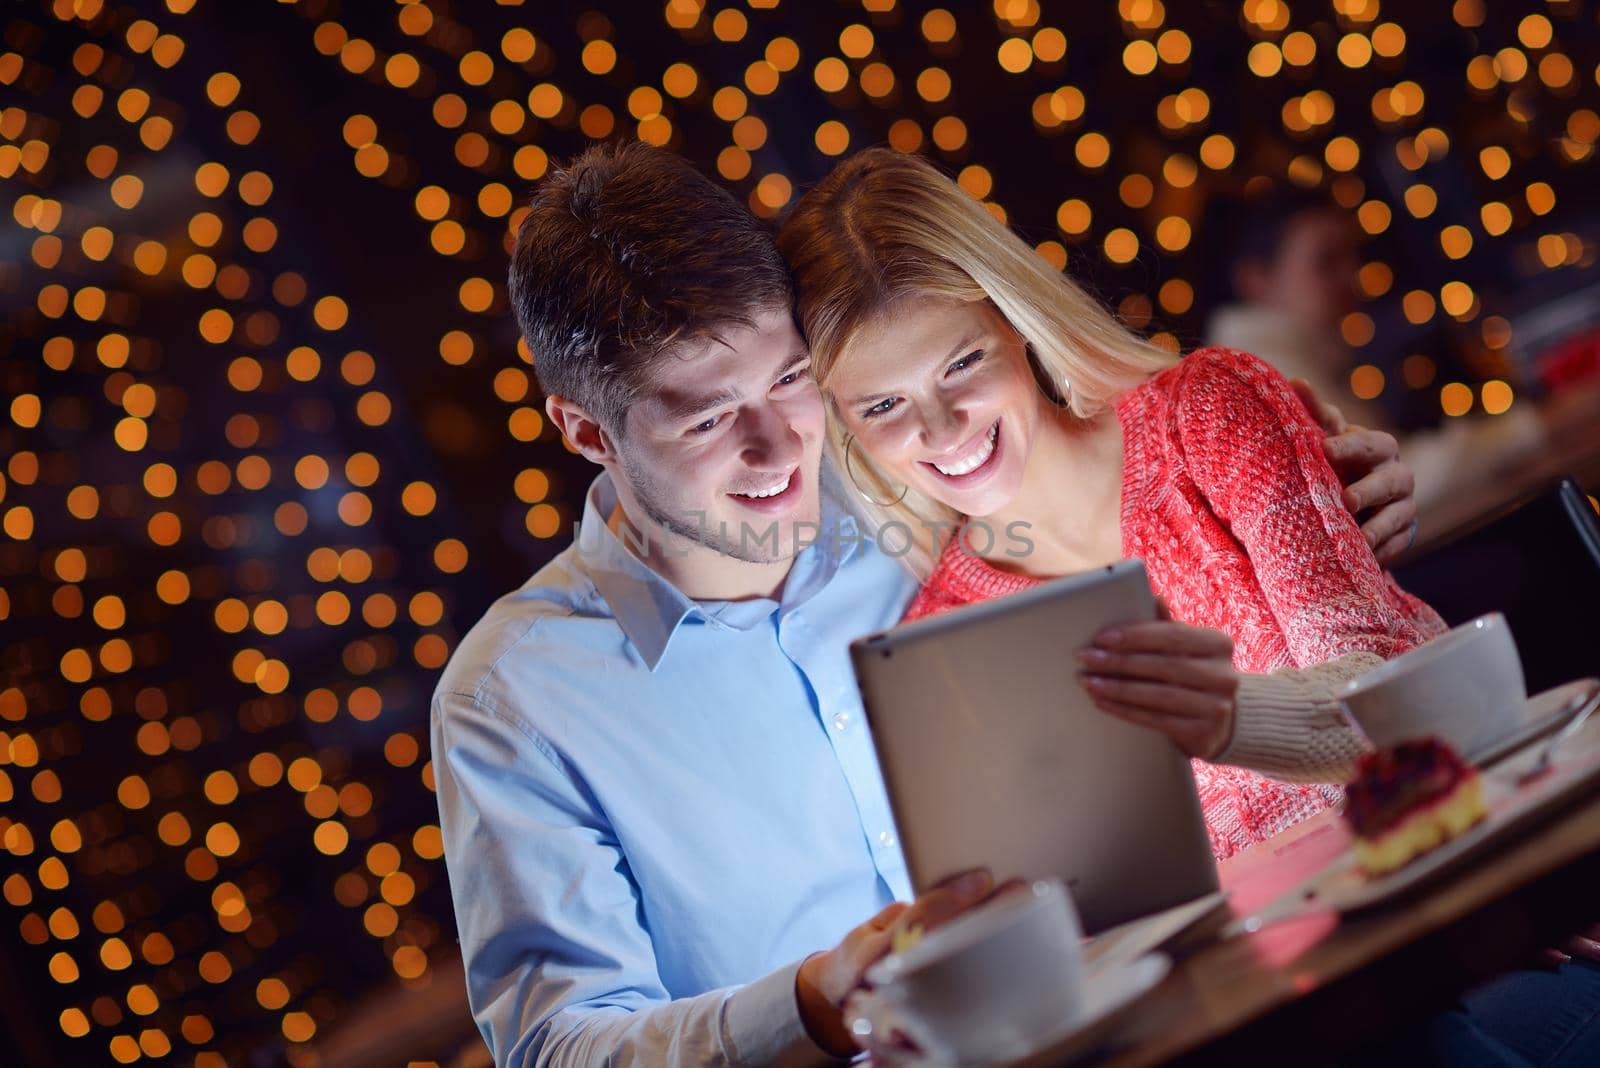 happy young couple with a tablet computer in restaurant